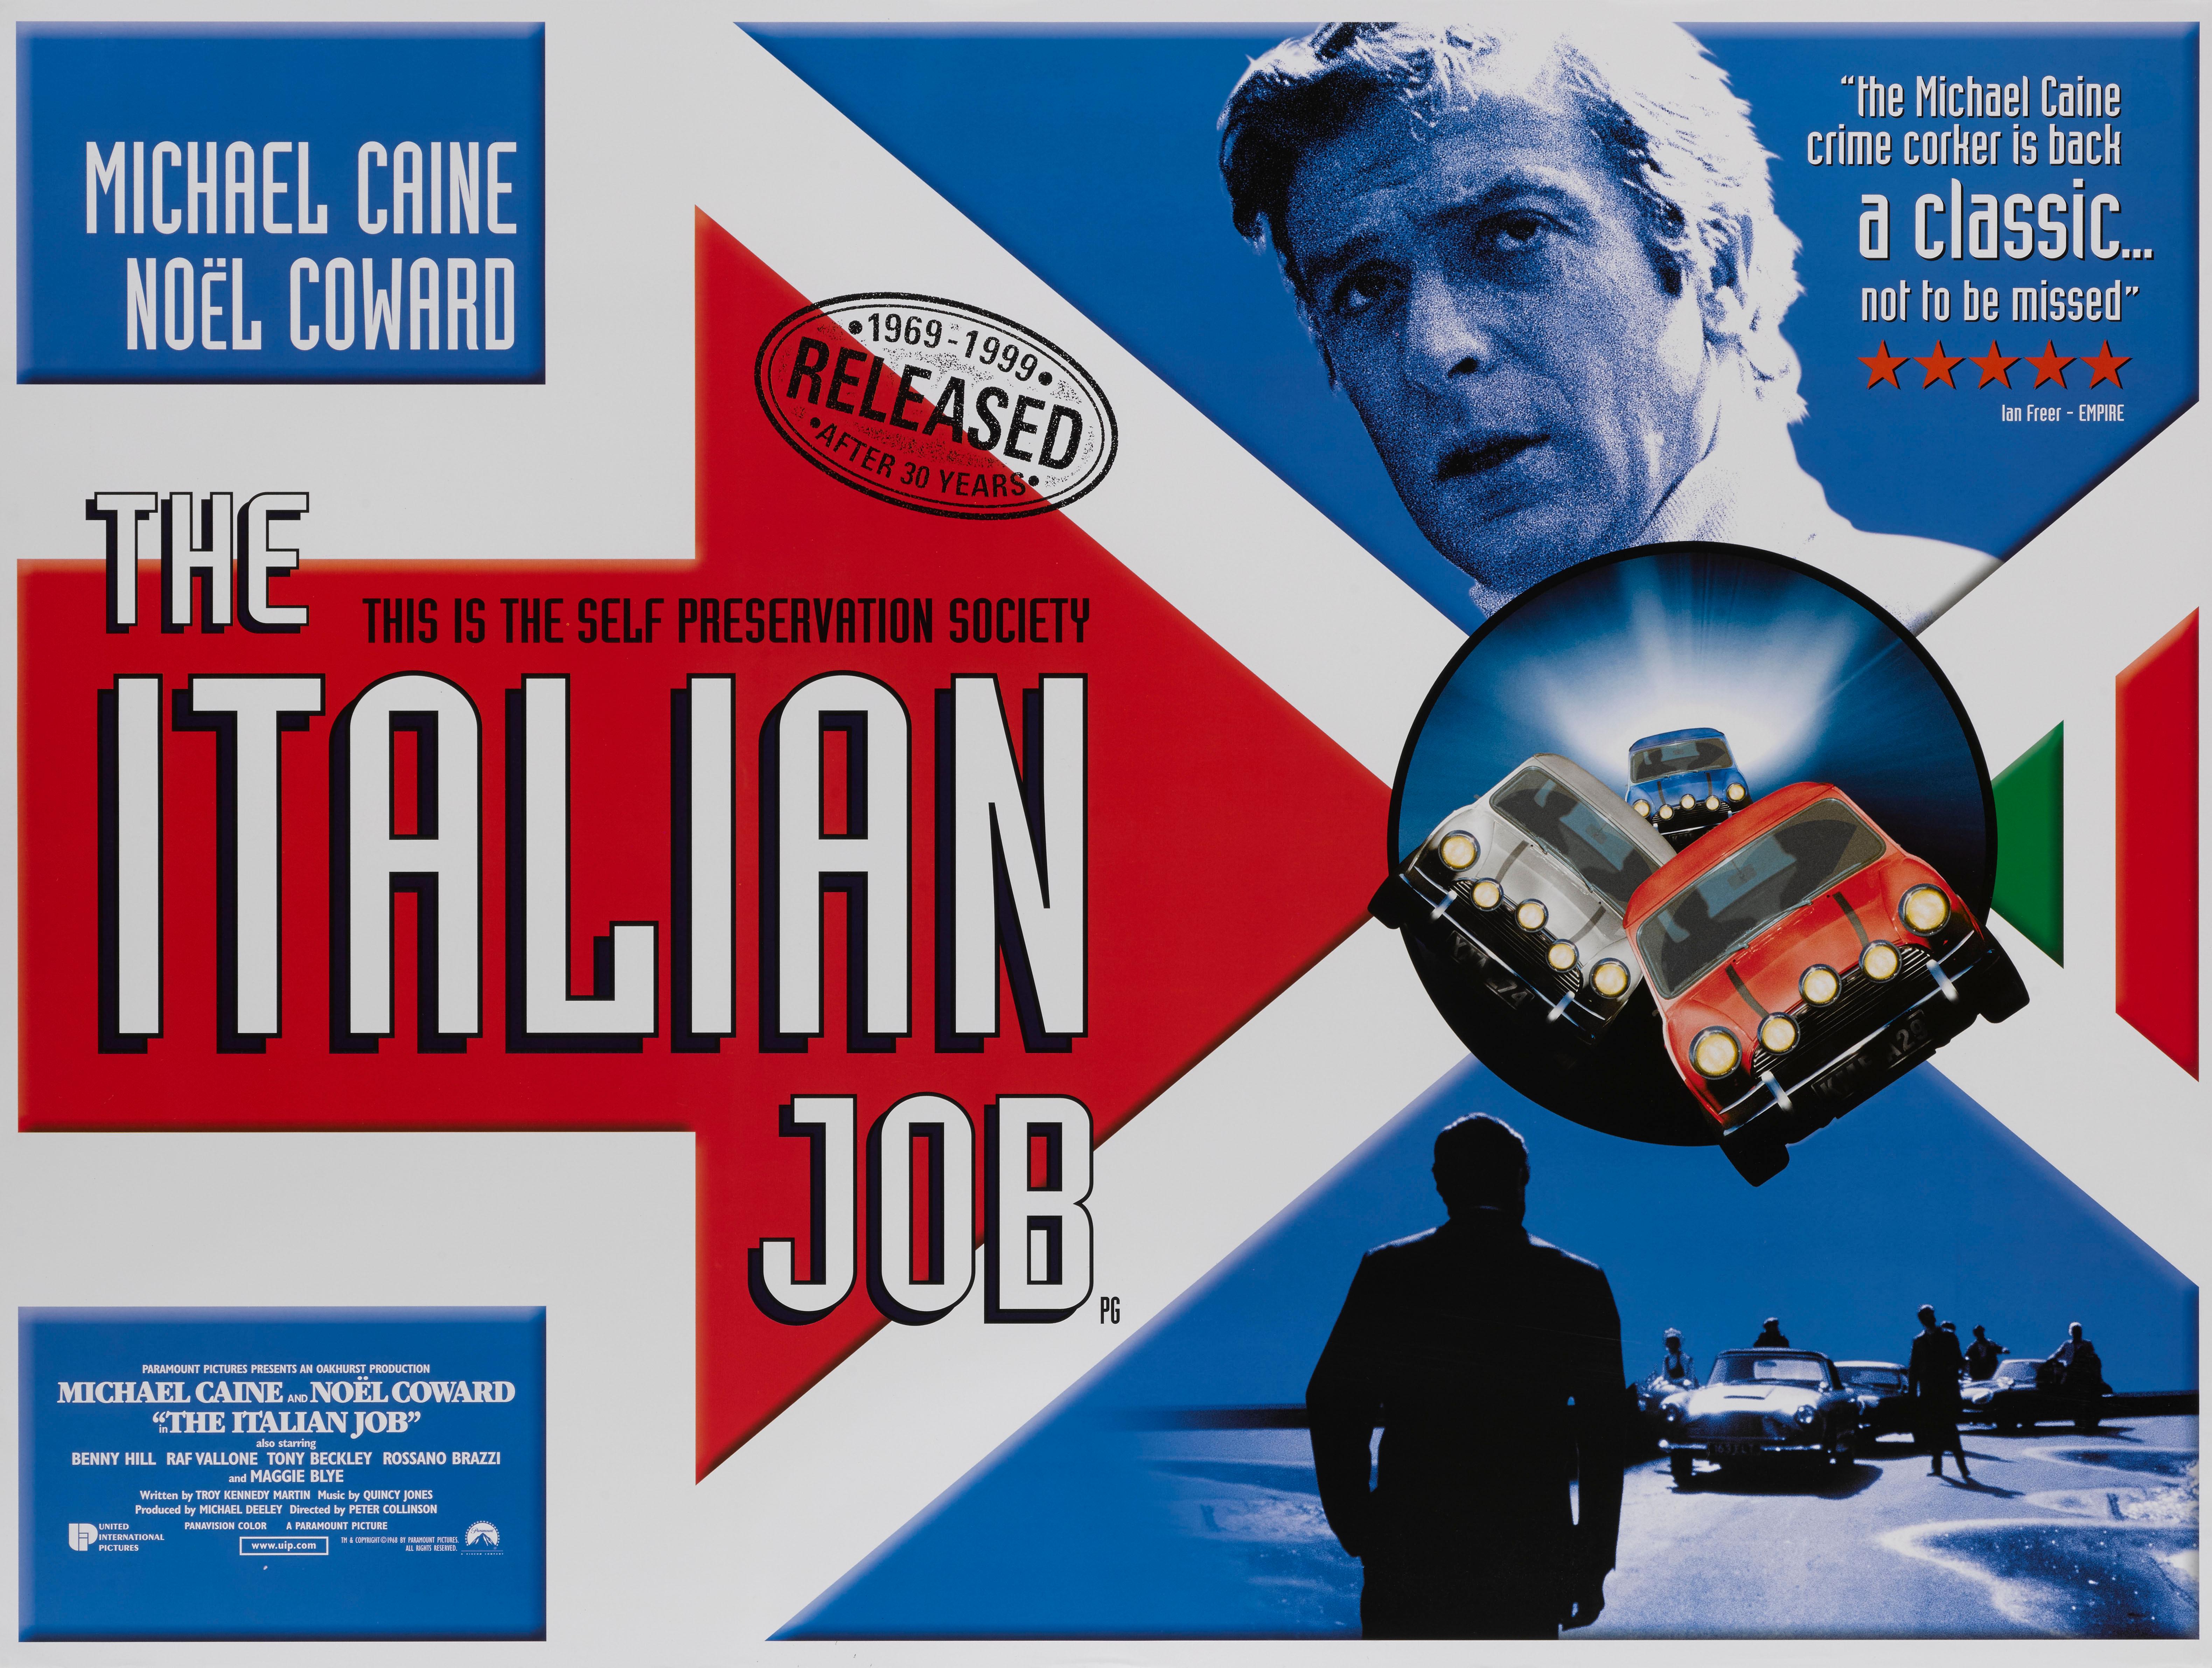 Original British movie poster for Michael Caine and Noel Coward's 1969 Comic Crime caper about a plan to steal a gold shipment.
This poster is from the Re-release (1999) 30th anniversary.